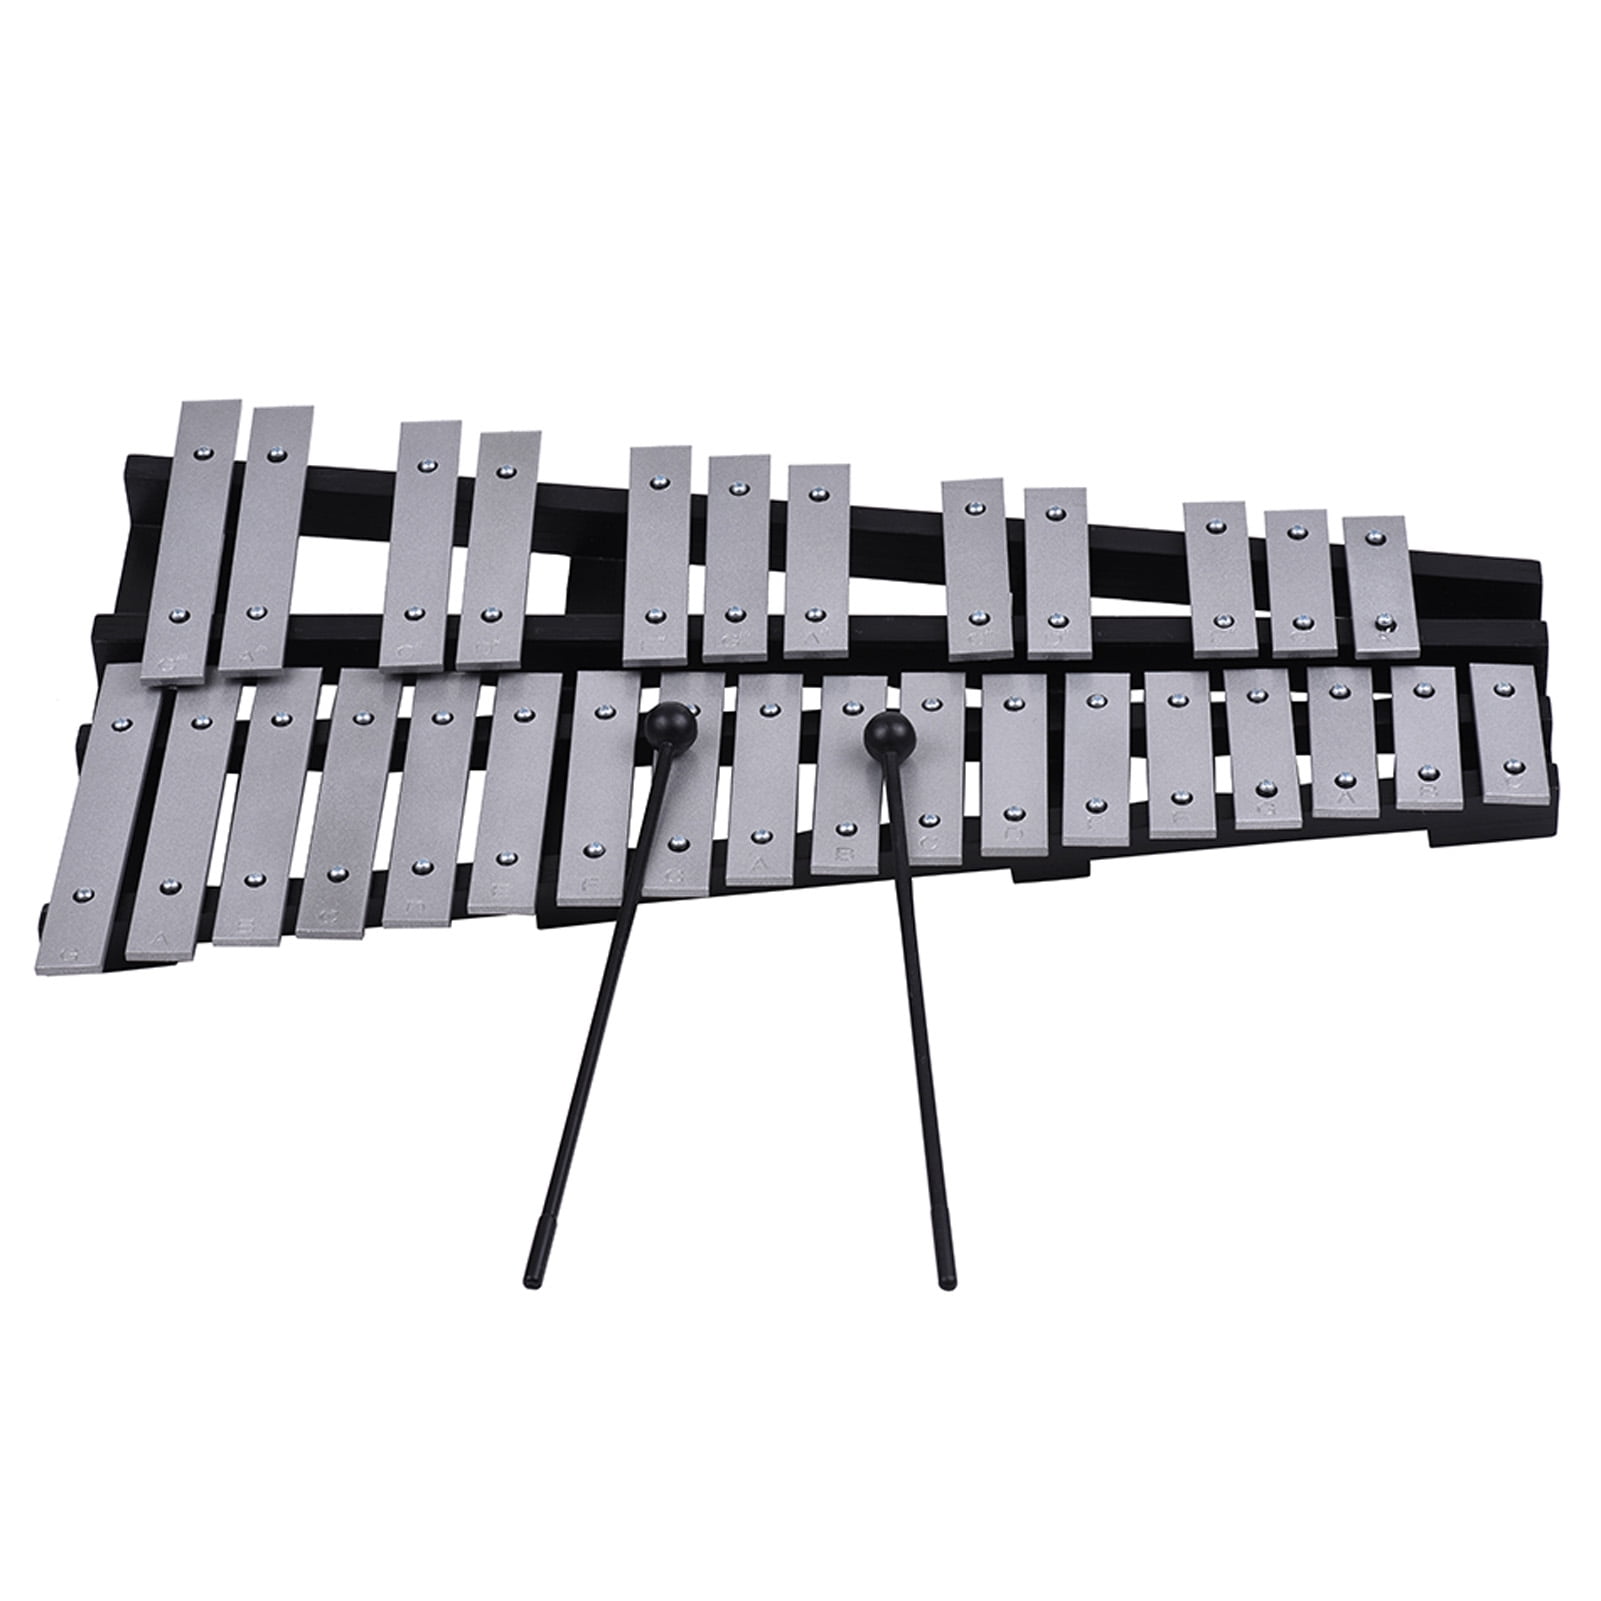 Docooler Foldable 30 Note Glockenspiel Xylophone Wooden Frame Aluminum Bars Educational Percussion Musical Instrument Gift with Carrying Bag 